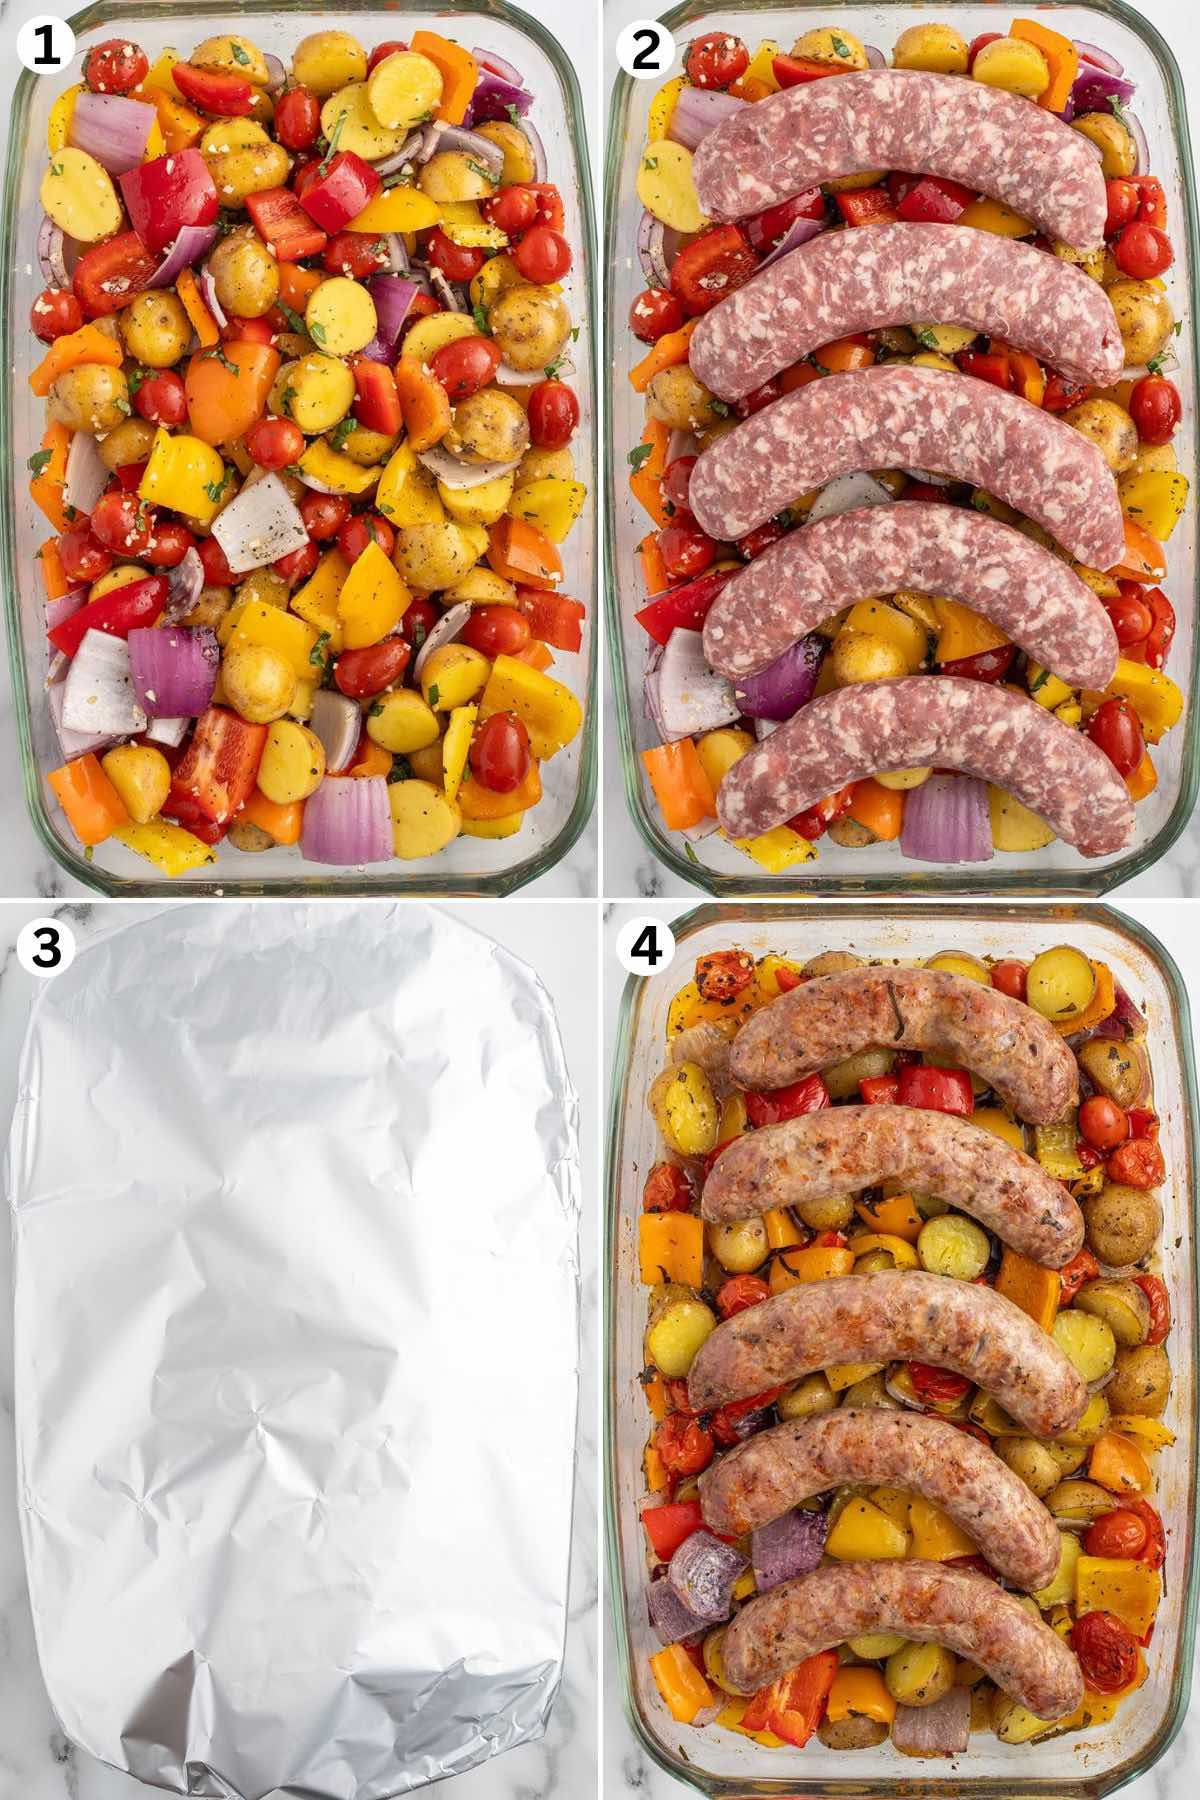 Toss the vegetables together until they are all coated with the olive oil. Place the mild Italian sausage links onto the top of all the vegetables in the baking dish. Cover with aluminum foil and bake. Garnish with fresh chopped basil.